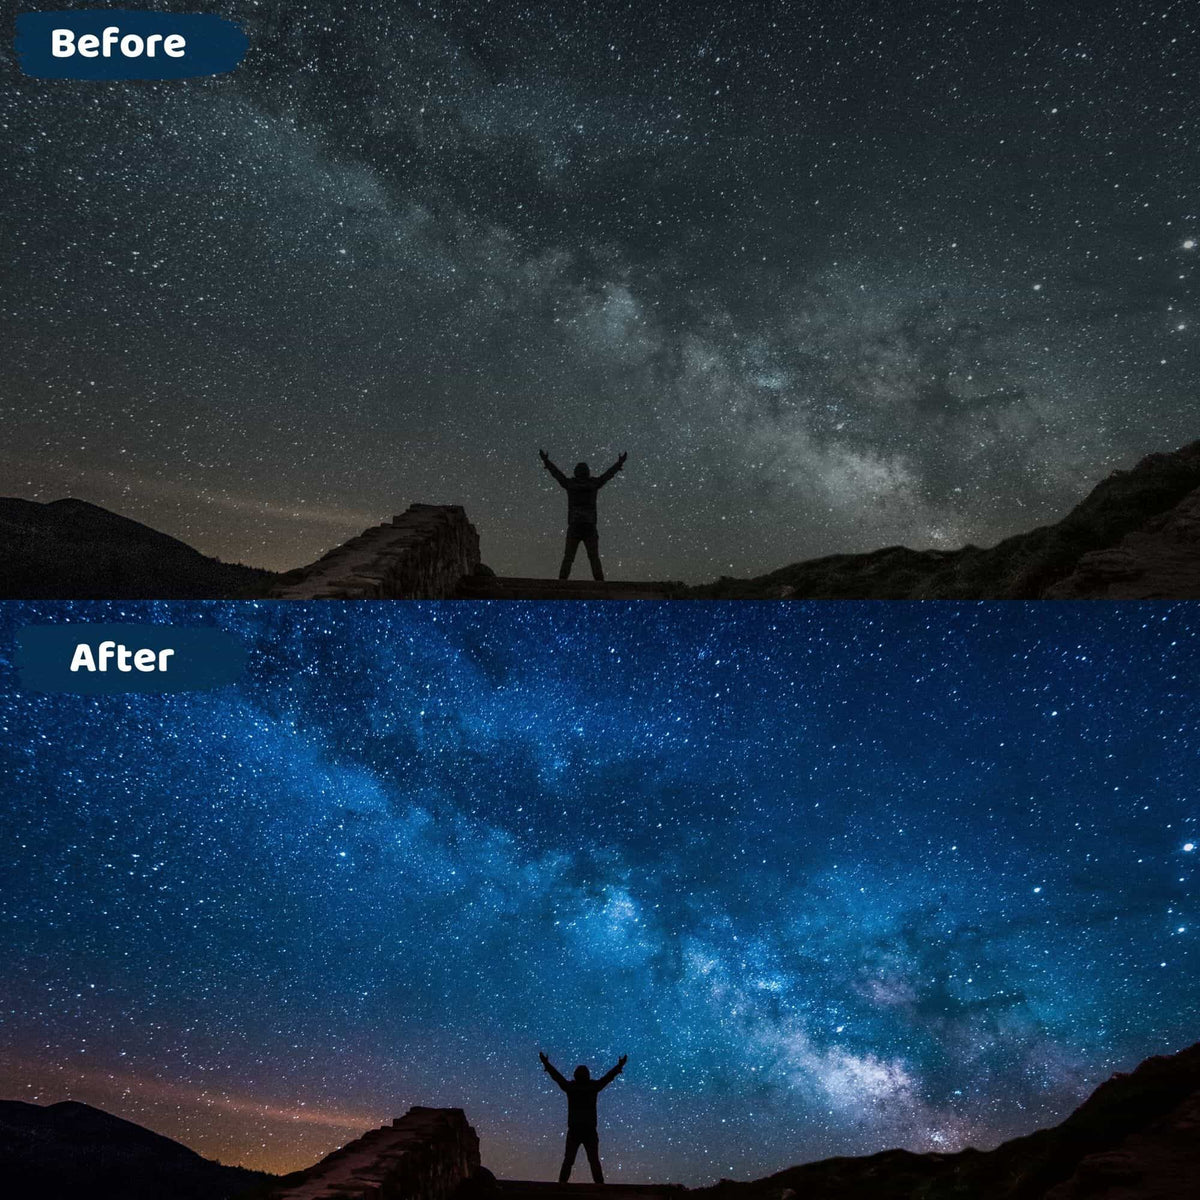 Starry Nights 2 Grid Comparison Before and After Horizontal v3